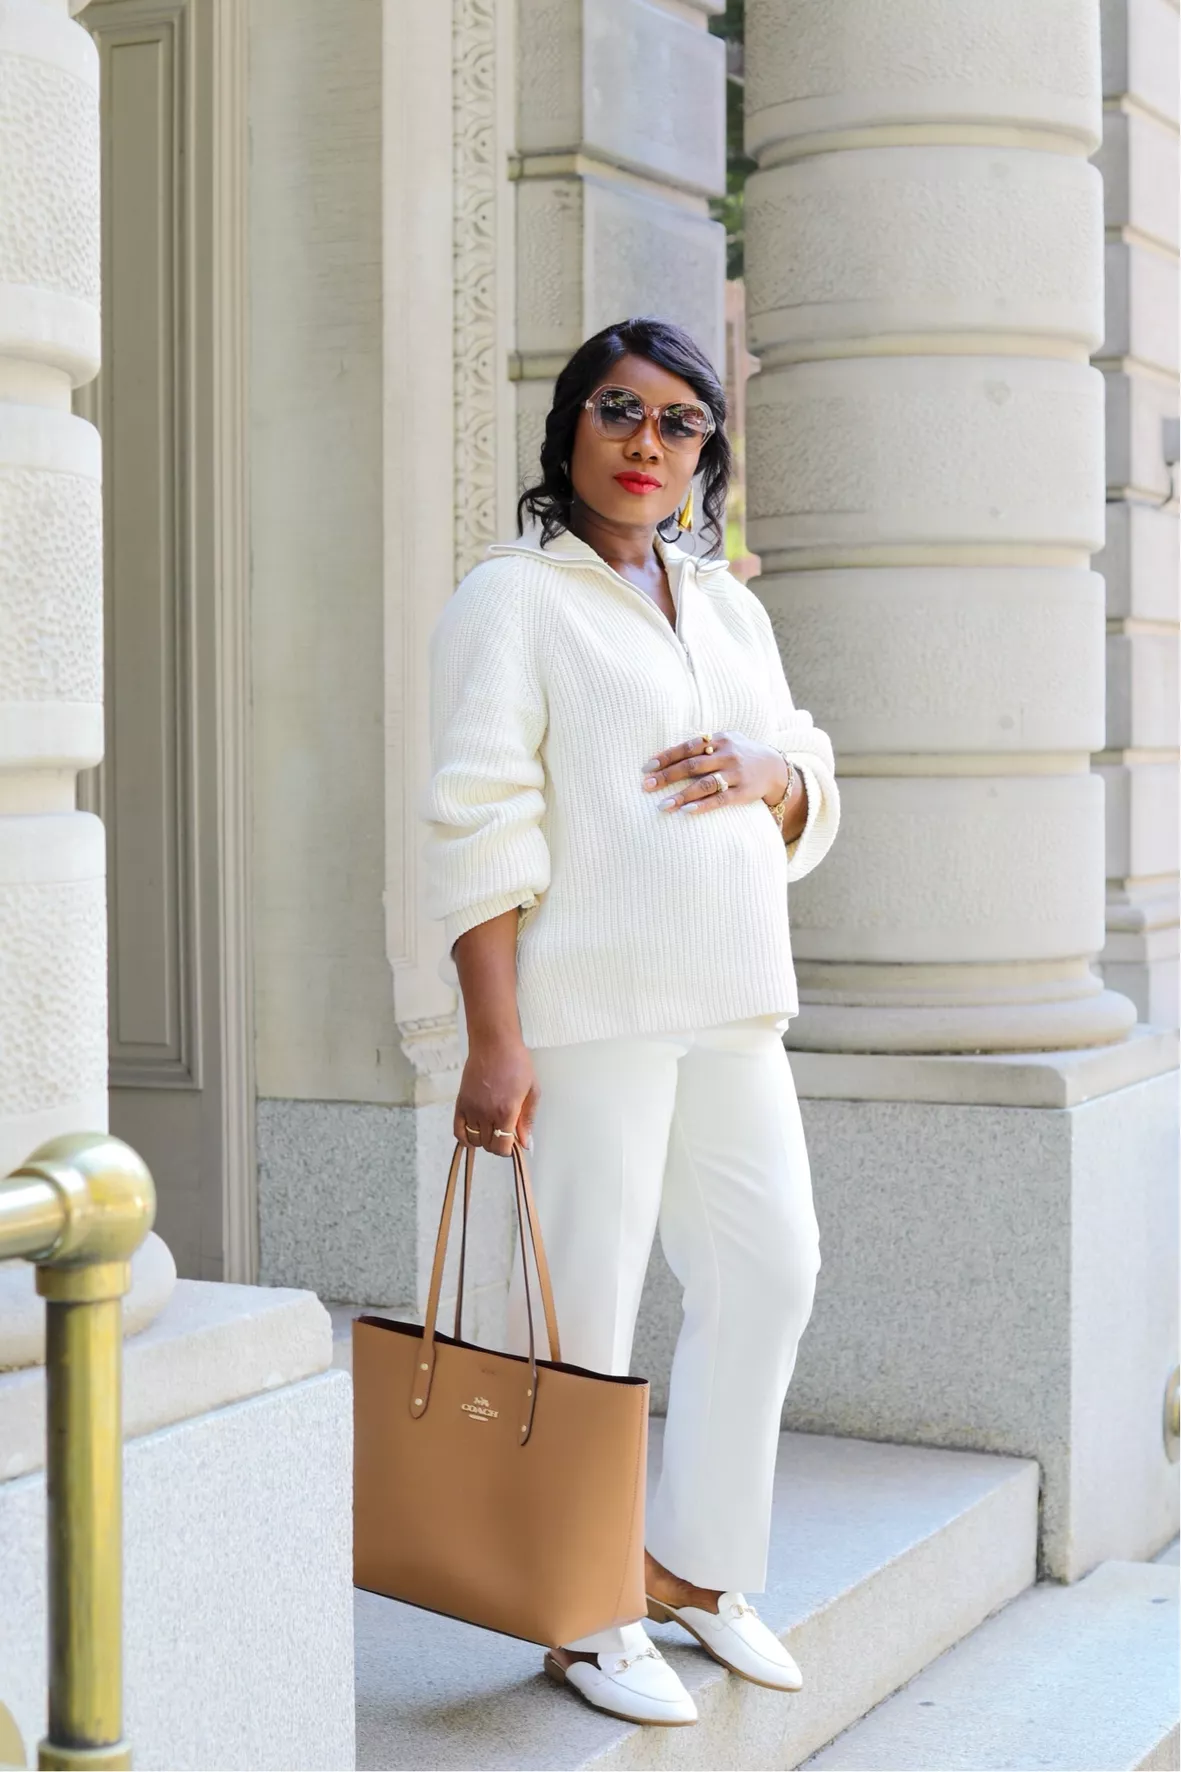 10 Chic White Pants Outfit Ideas for Women